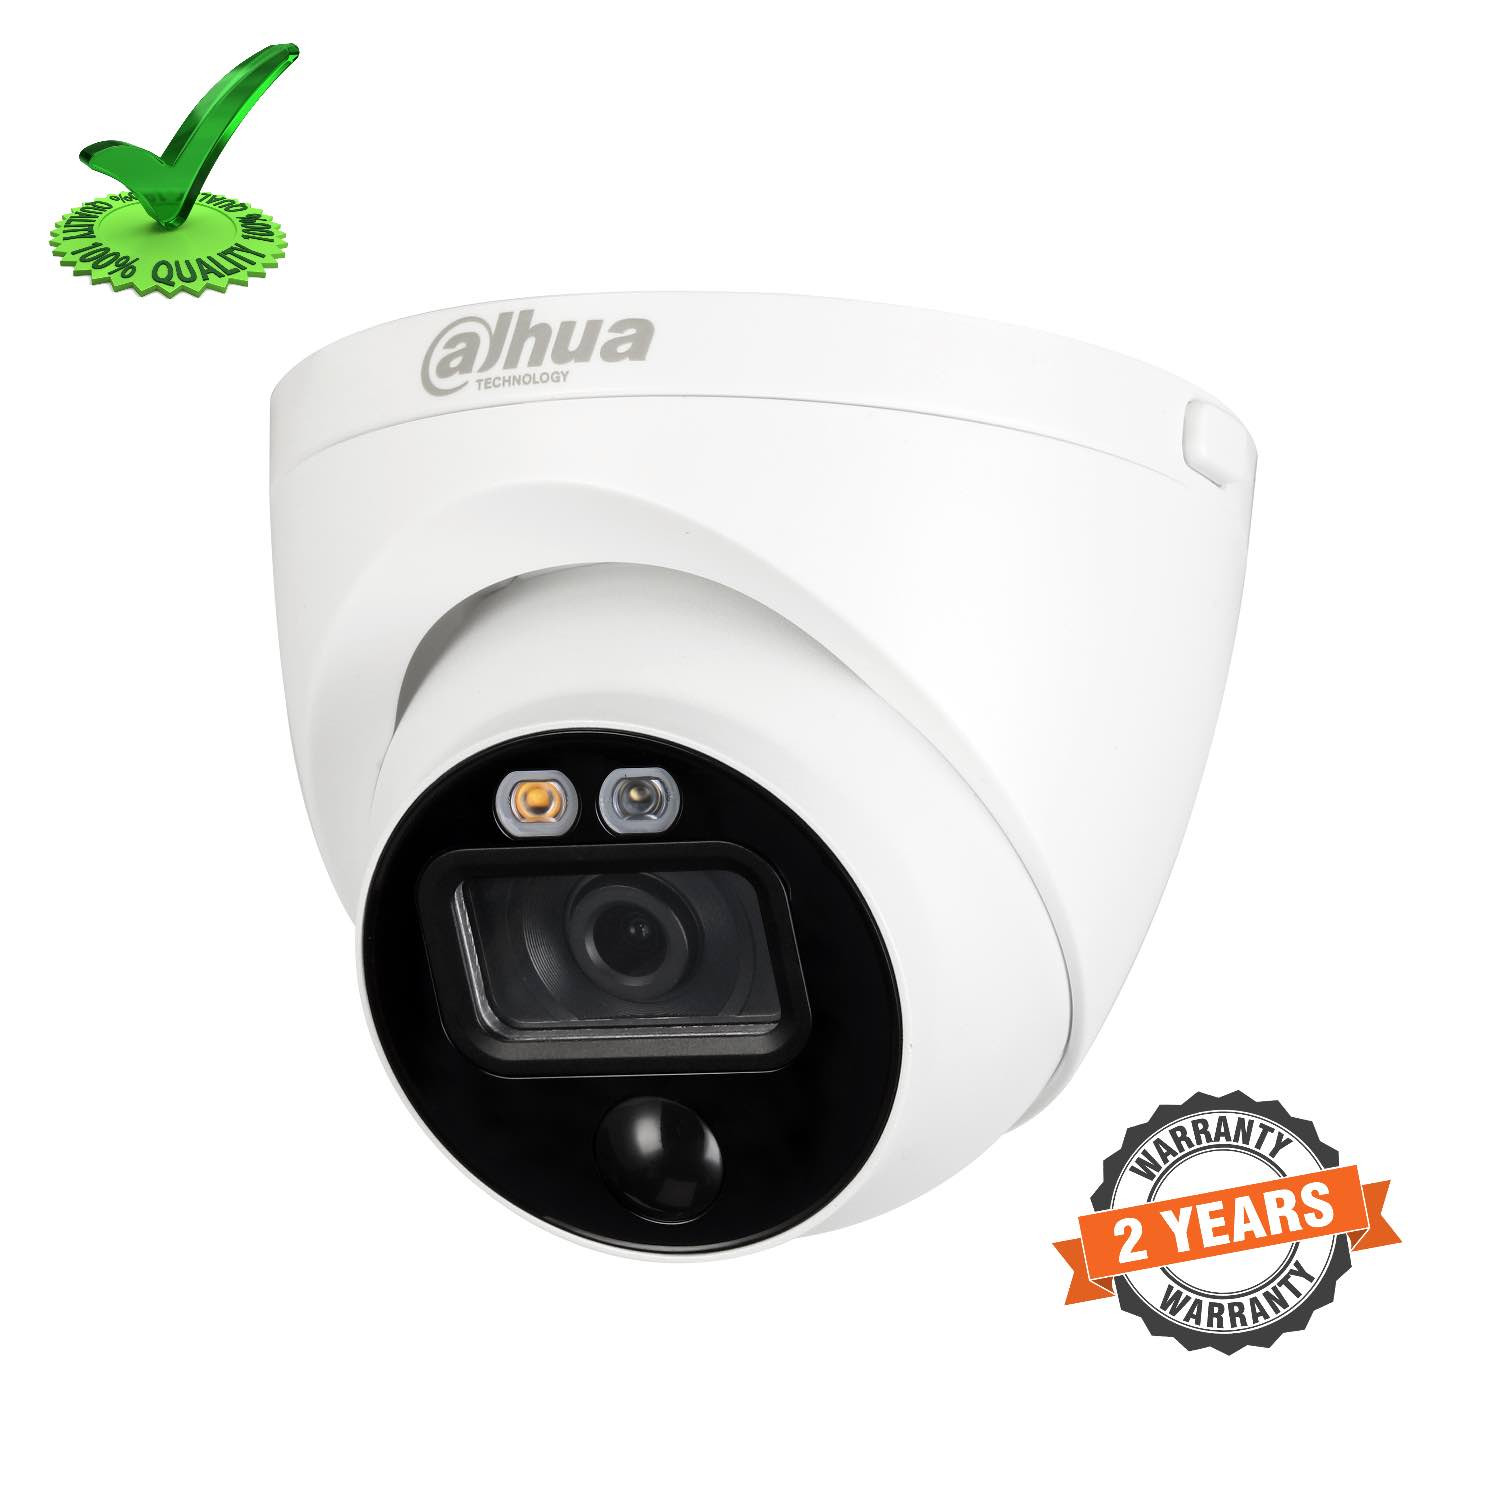 Dahua DH-HAC-ME1500EP-LED 5MP Digital Active Deterrence Camera